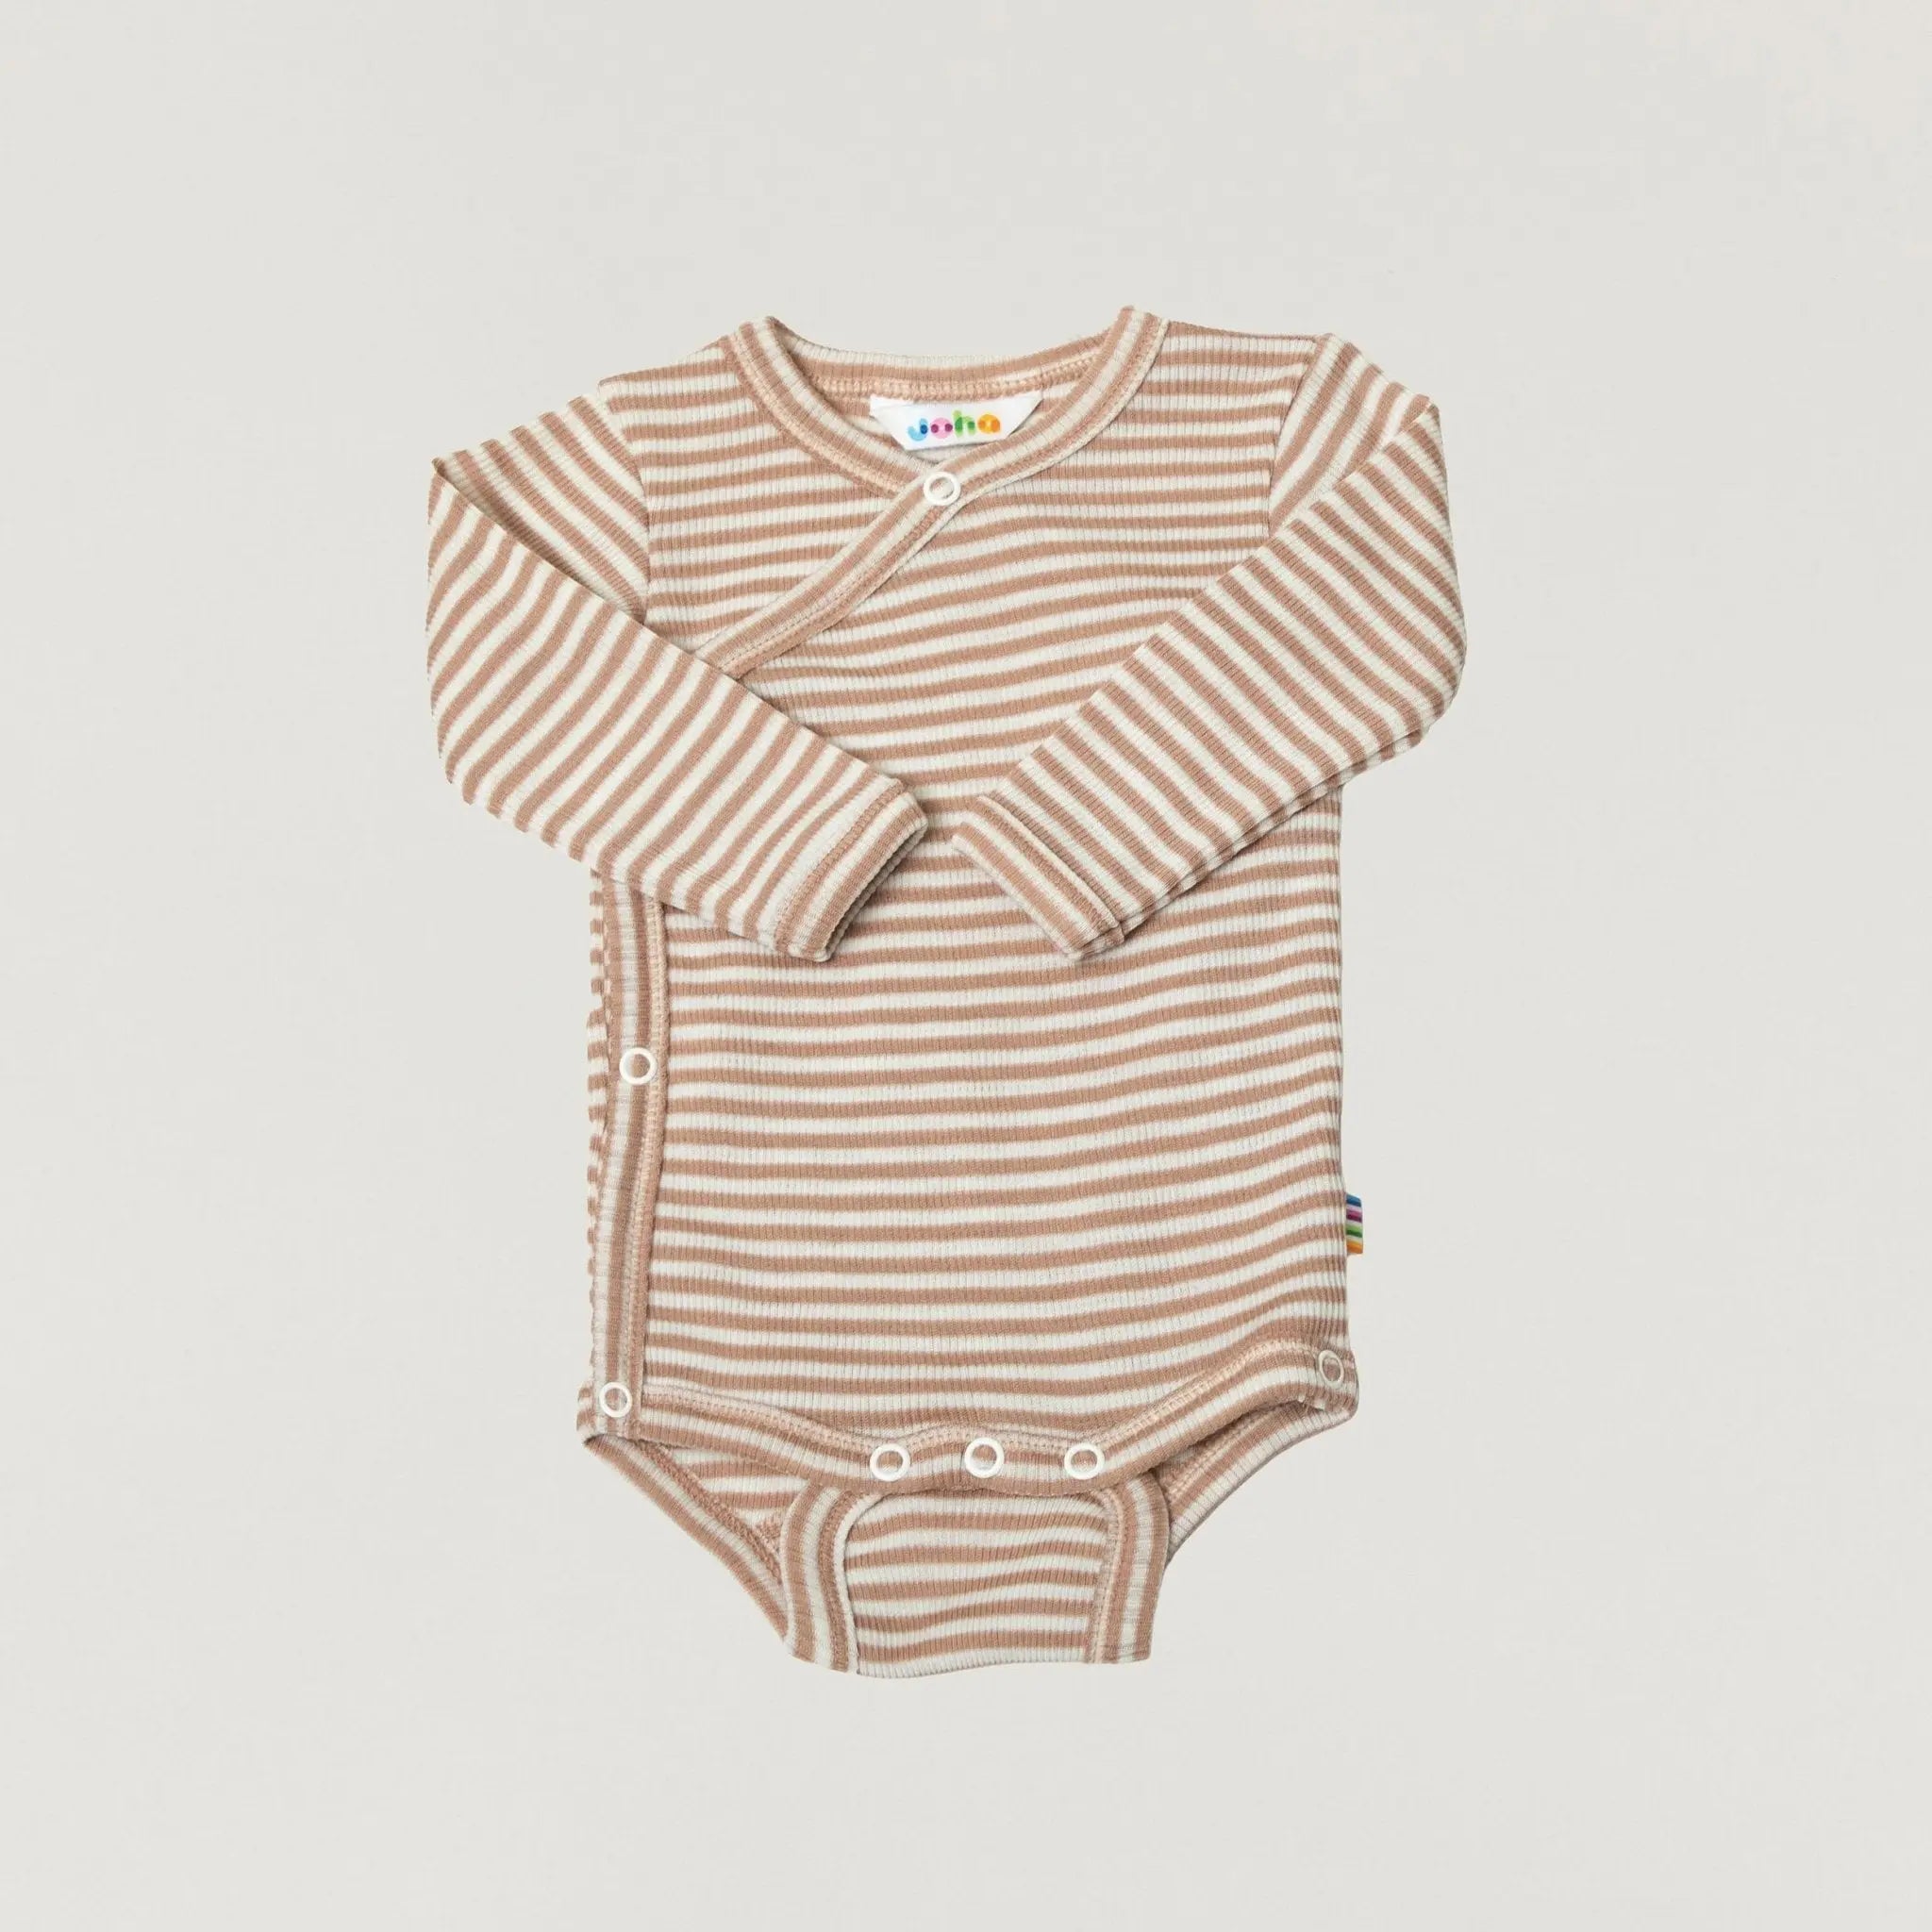 Babybox and Family Joha Wickelbody aus Wolle & Seide 40/44 light-brown-stripes-jh #farbe_40/44